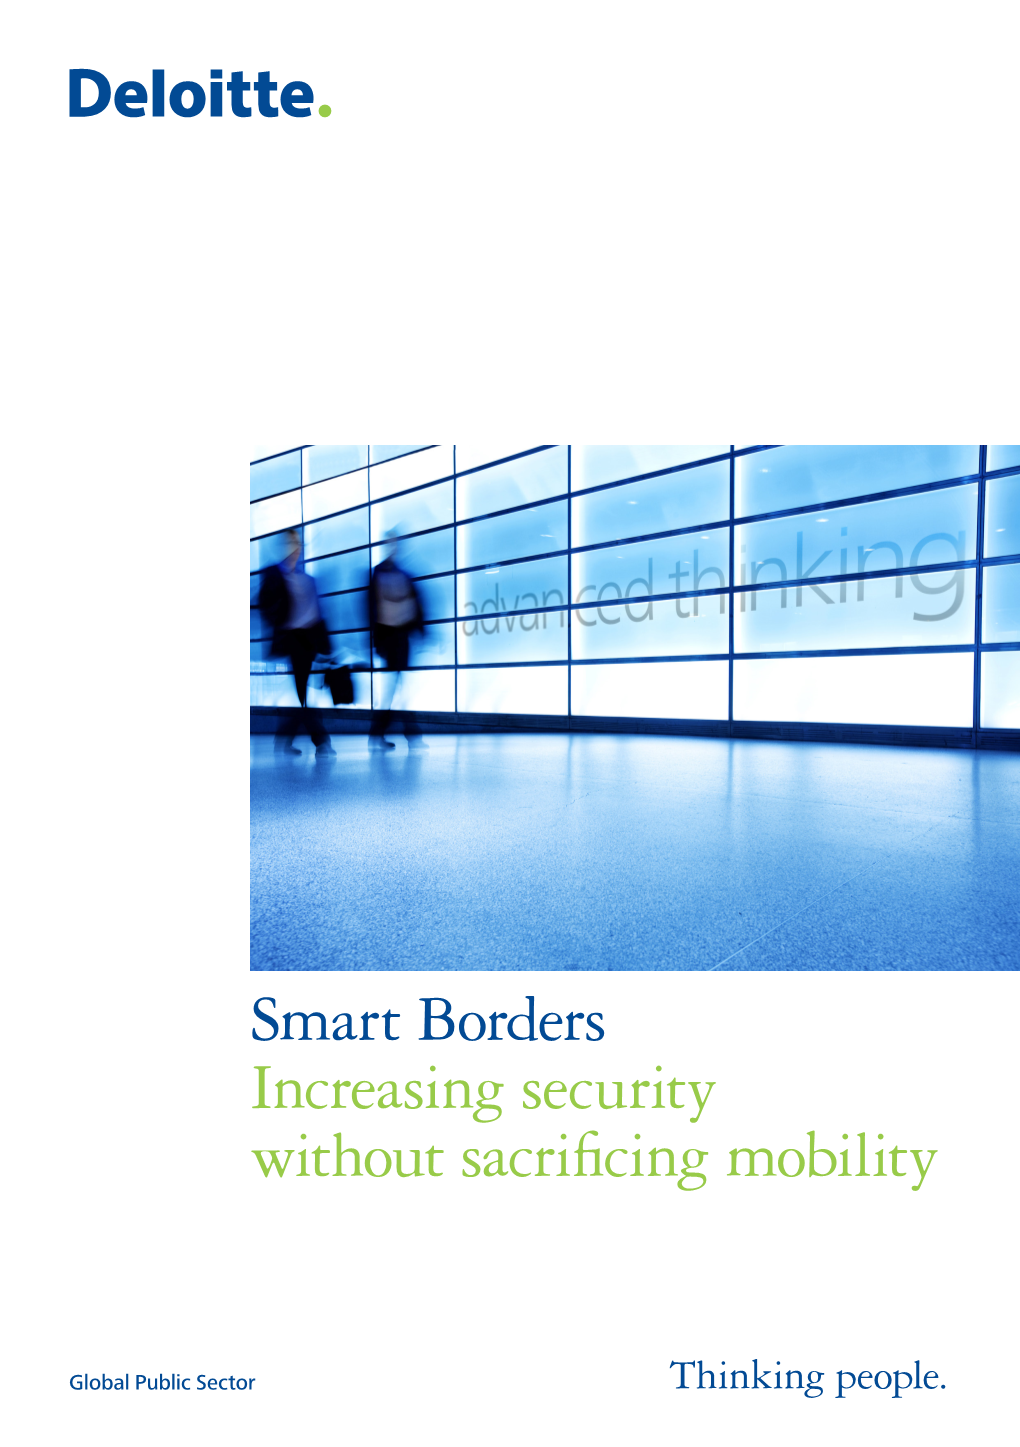 Smart Borders Increasing Security Without Sacrificing Mobility